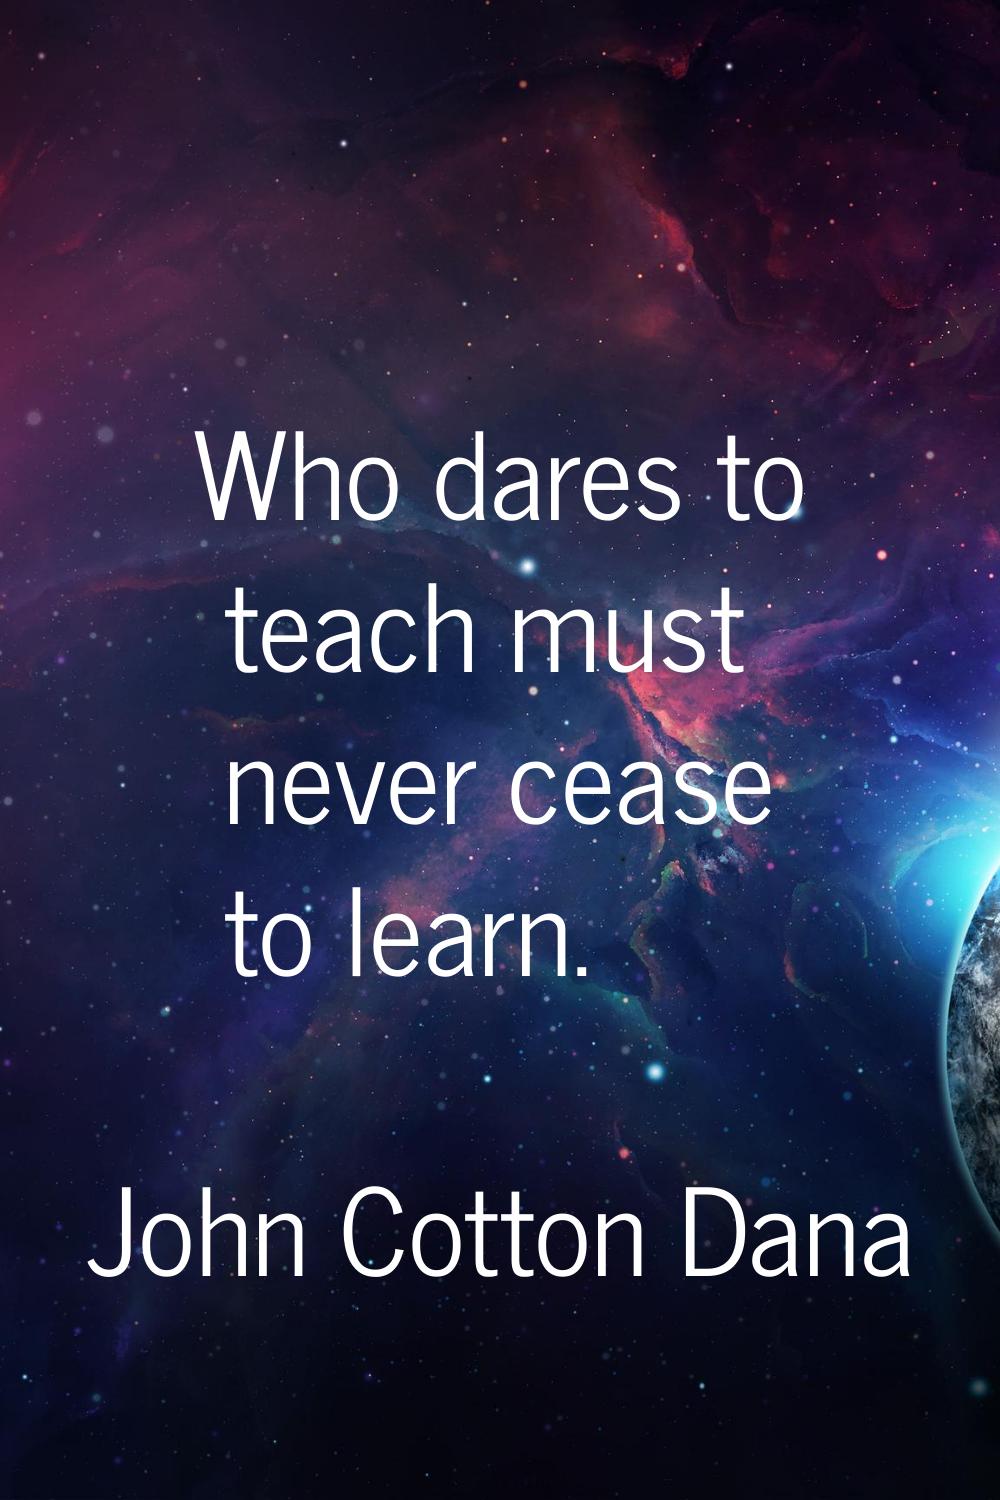 Who dares to teach must never cease to learn.